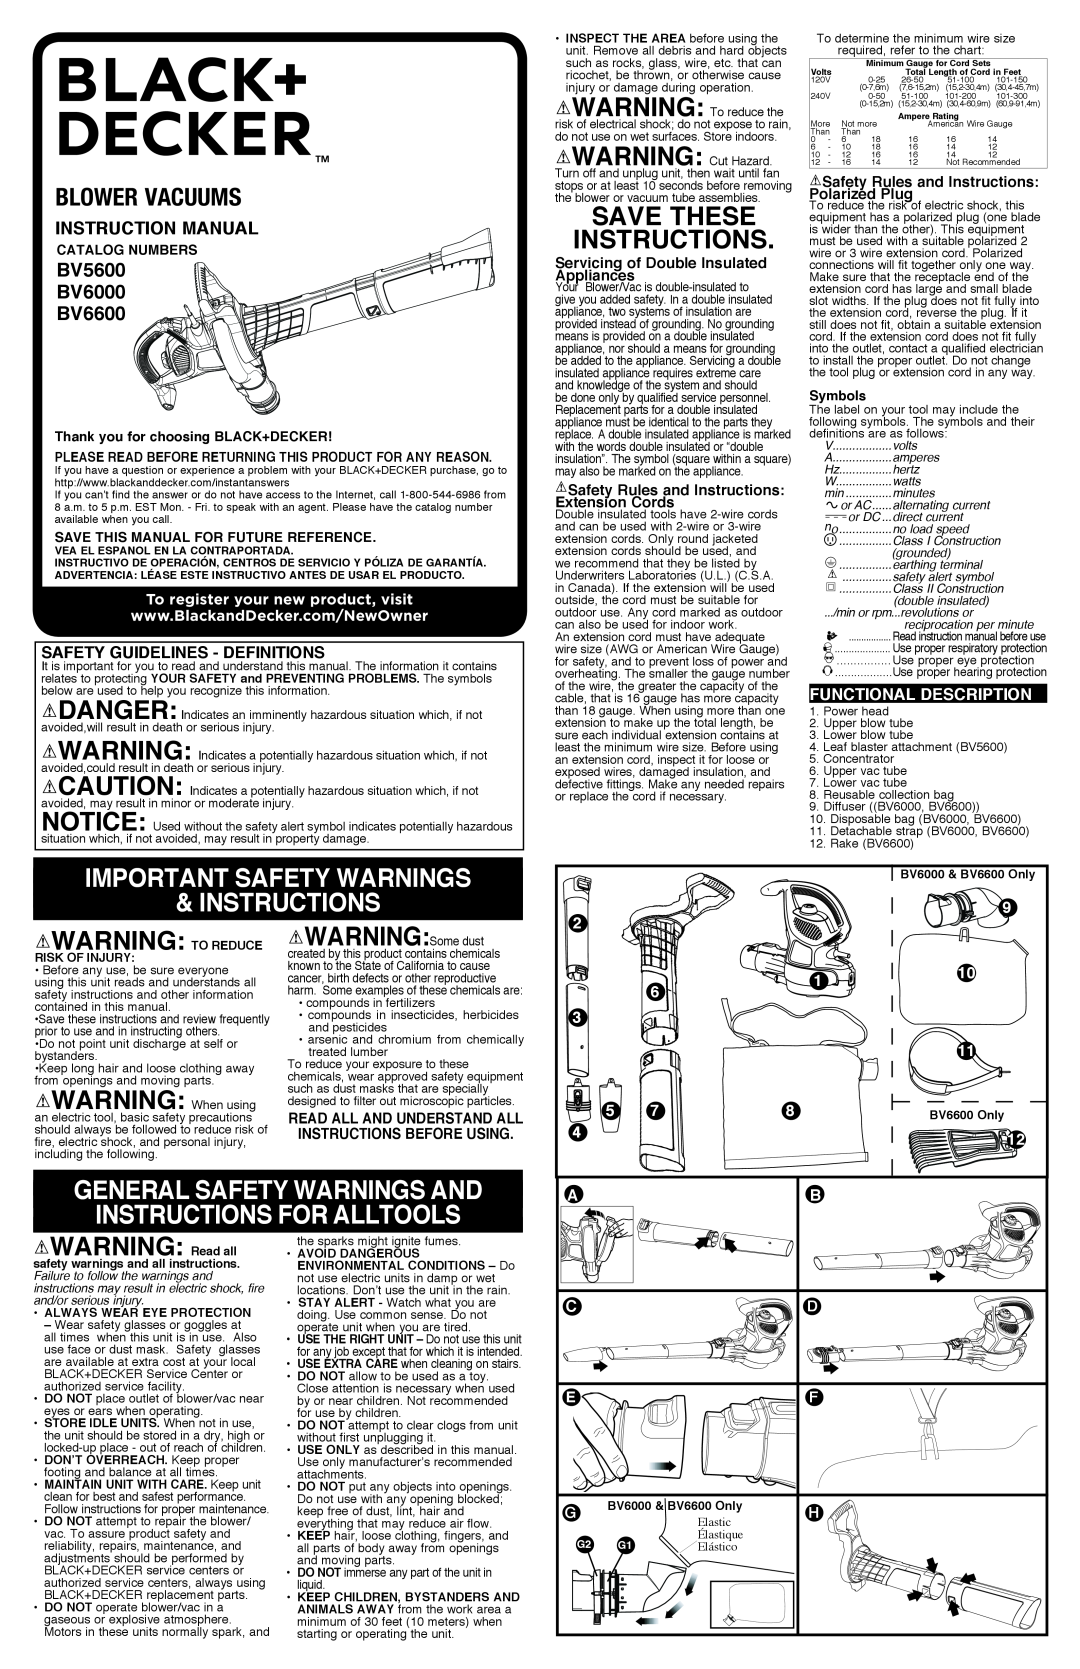 Black & Decker BV5600R instruction manual Save These Instructions, important Safety warnings instructions, Blower Vacuums 